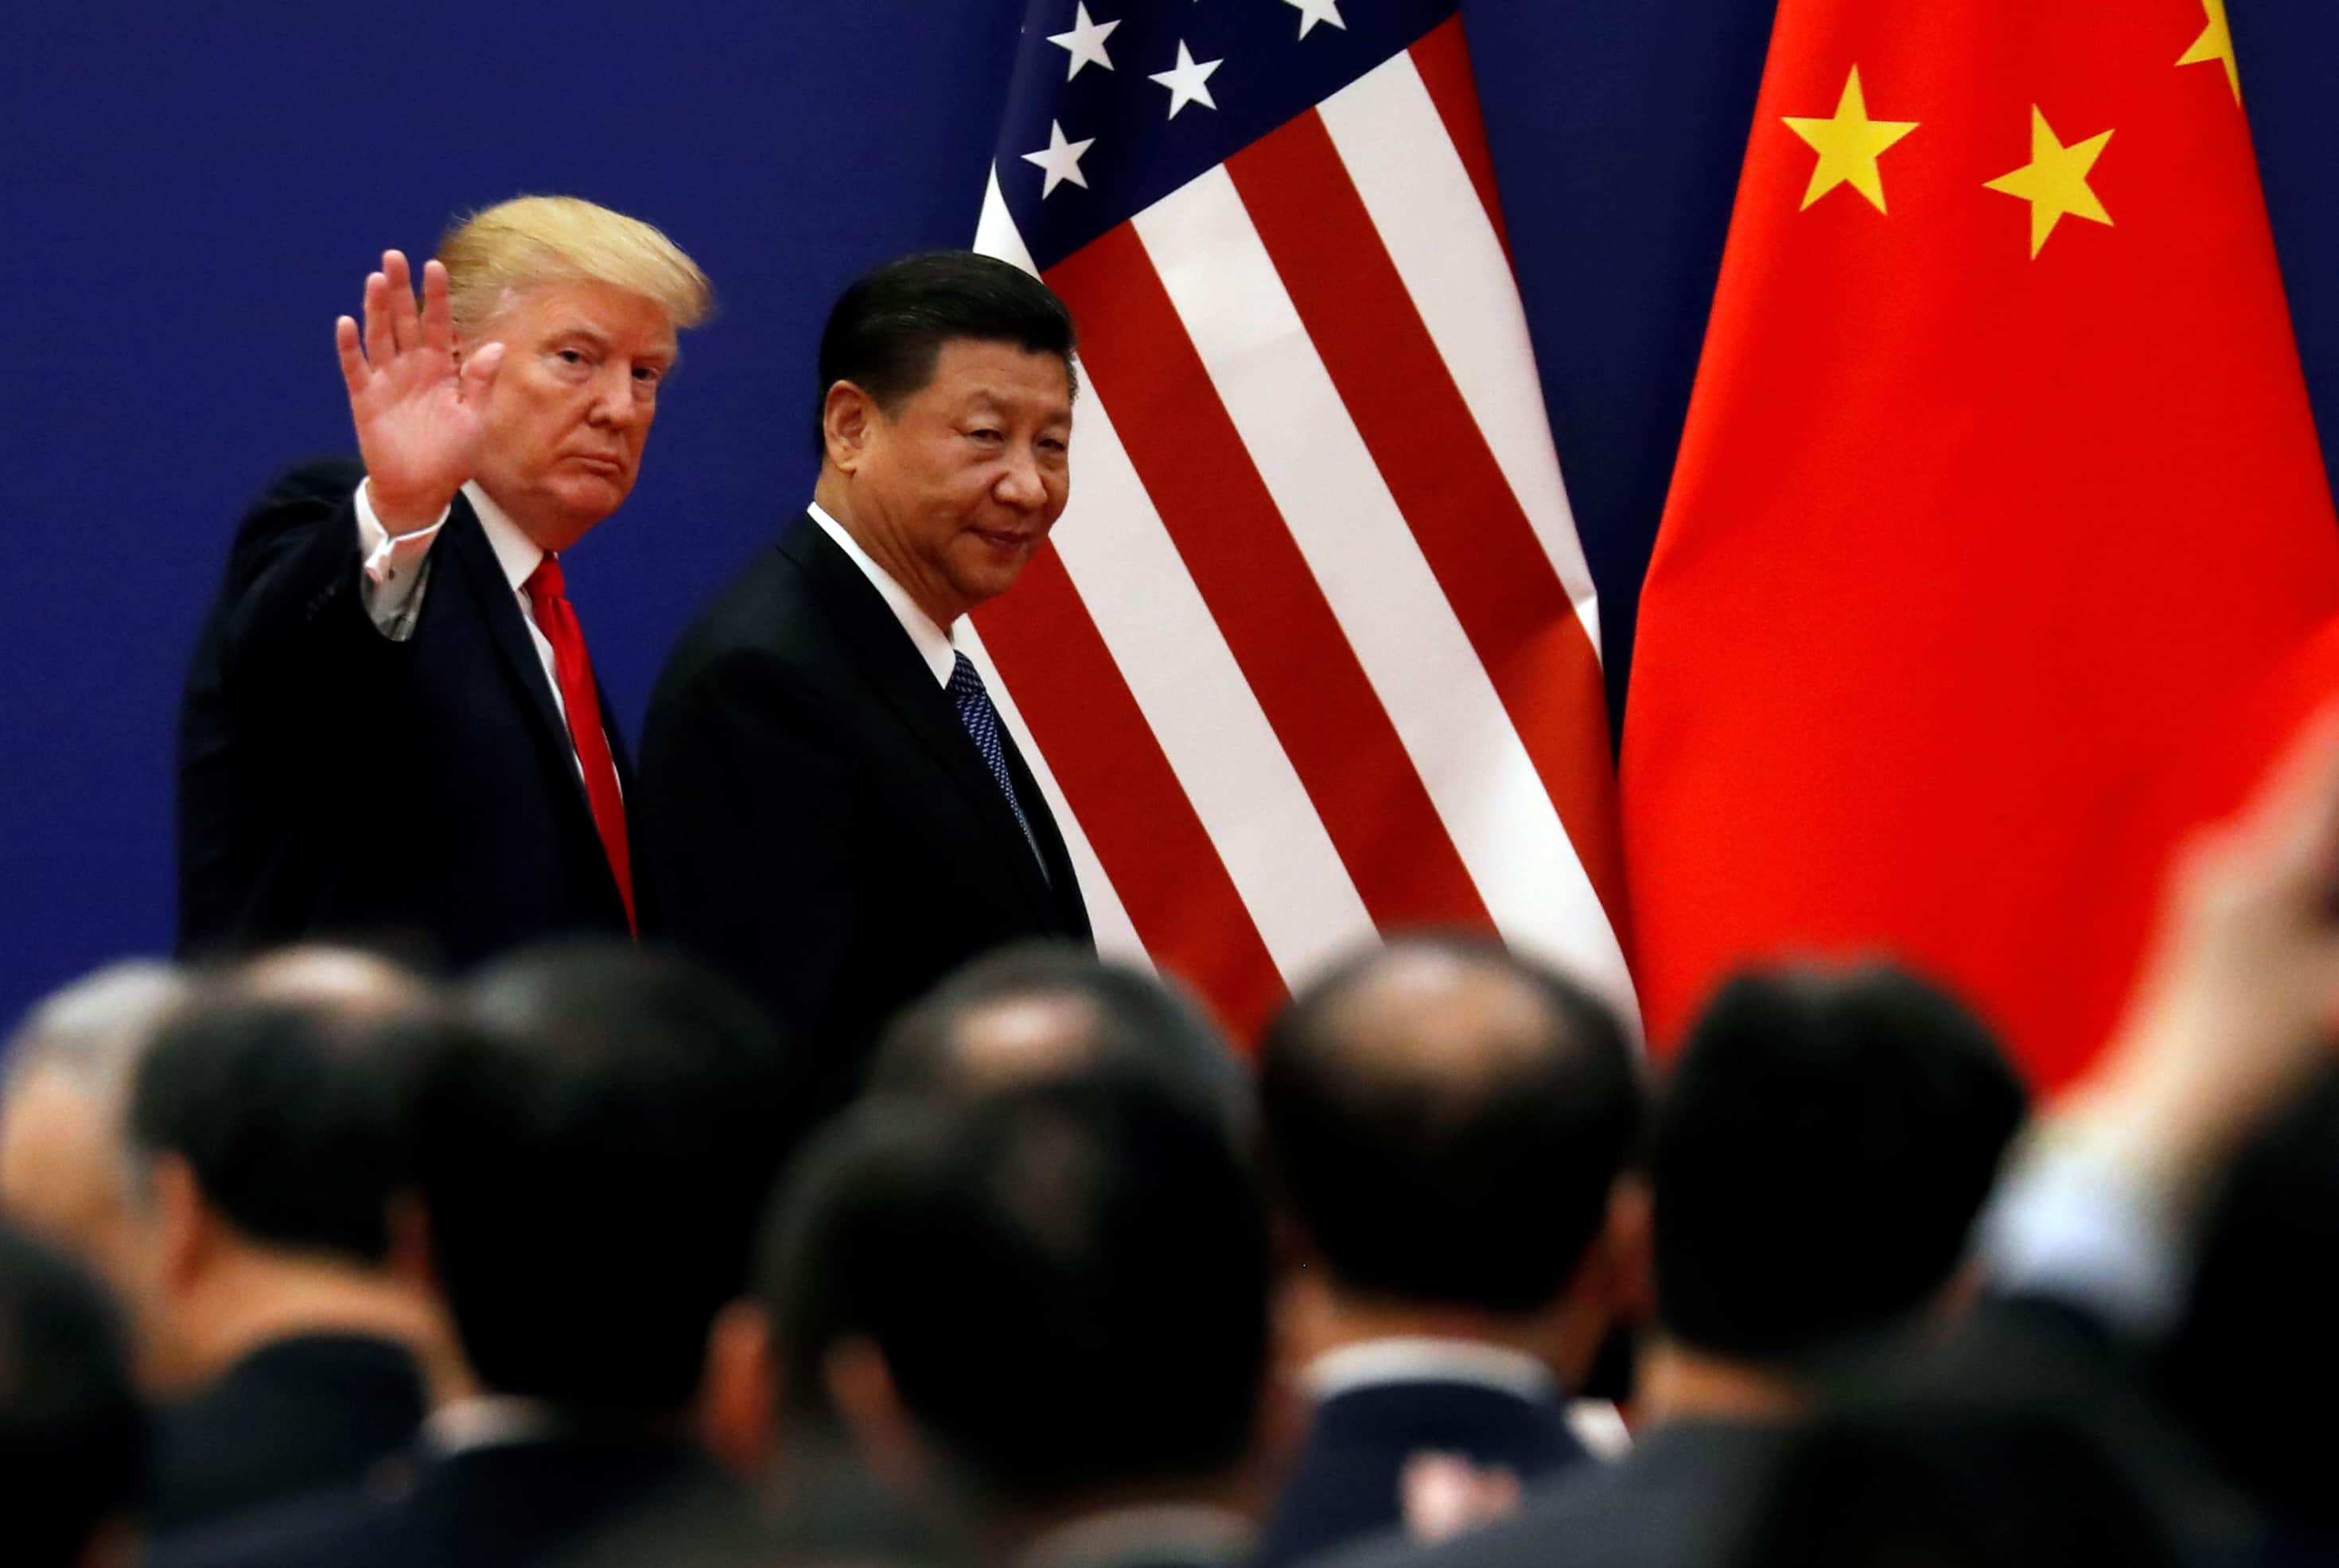 Donald Trump says US-China talks &#039;productive&#039; even as Beijing vows to counter tariffs